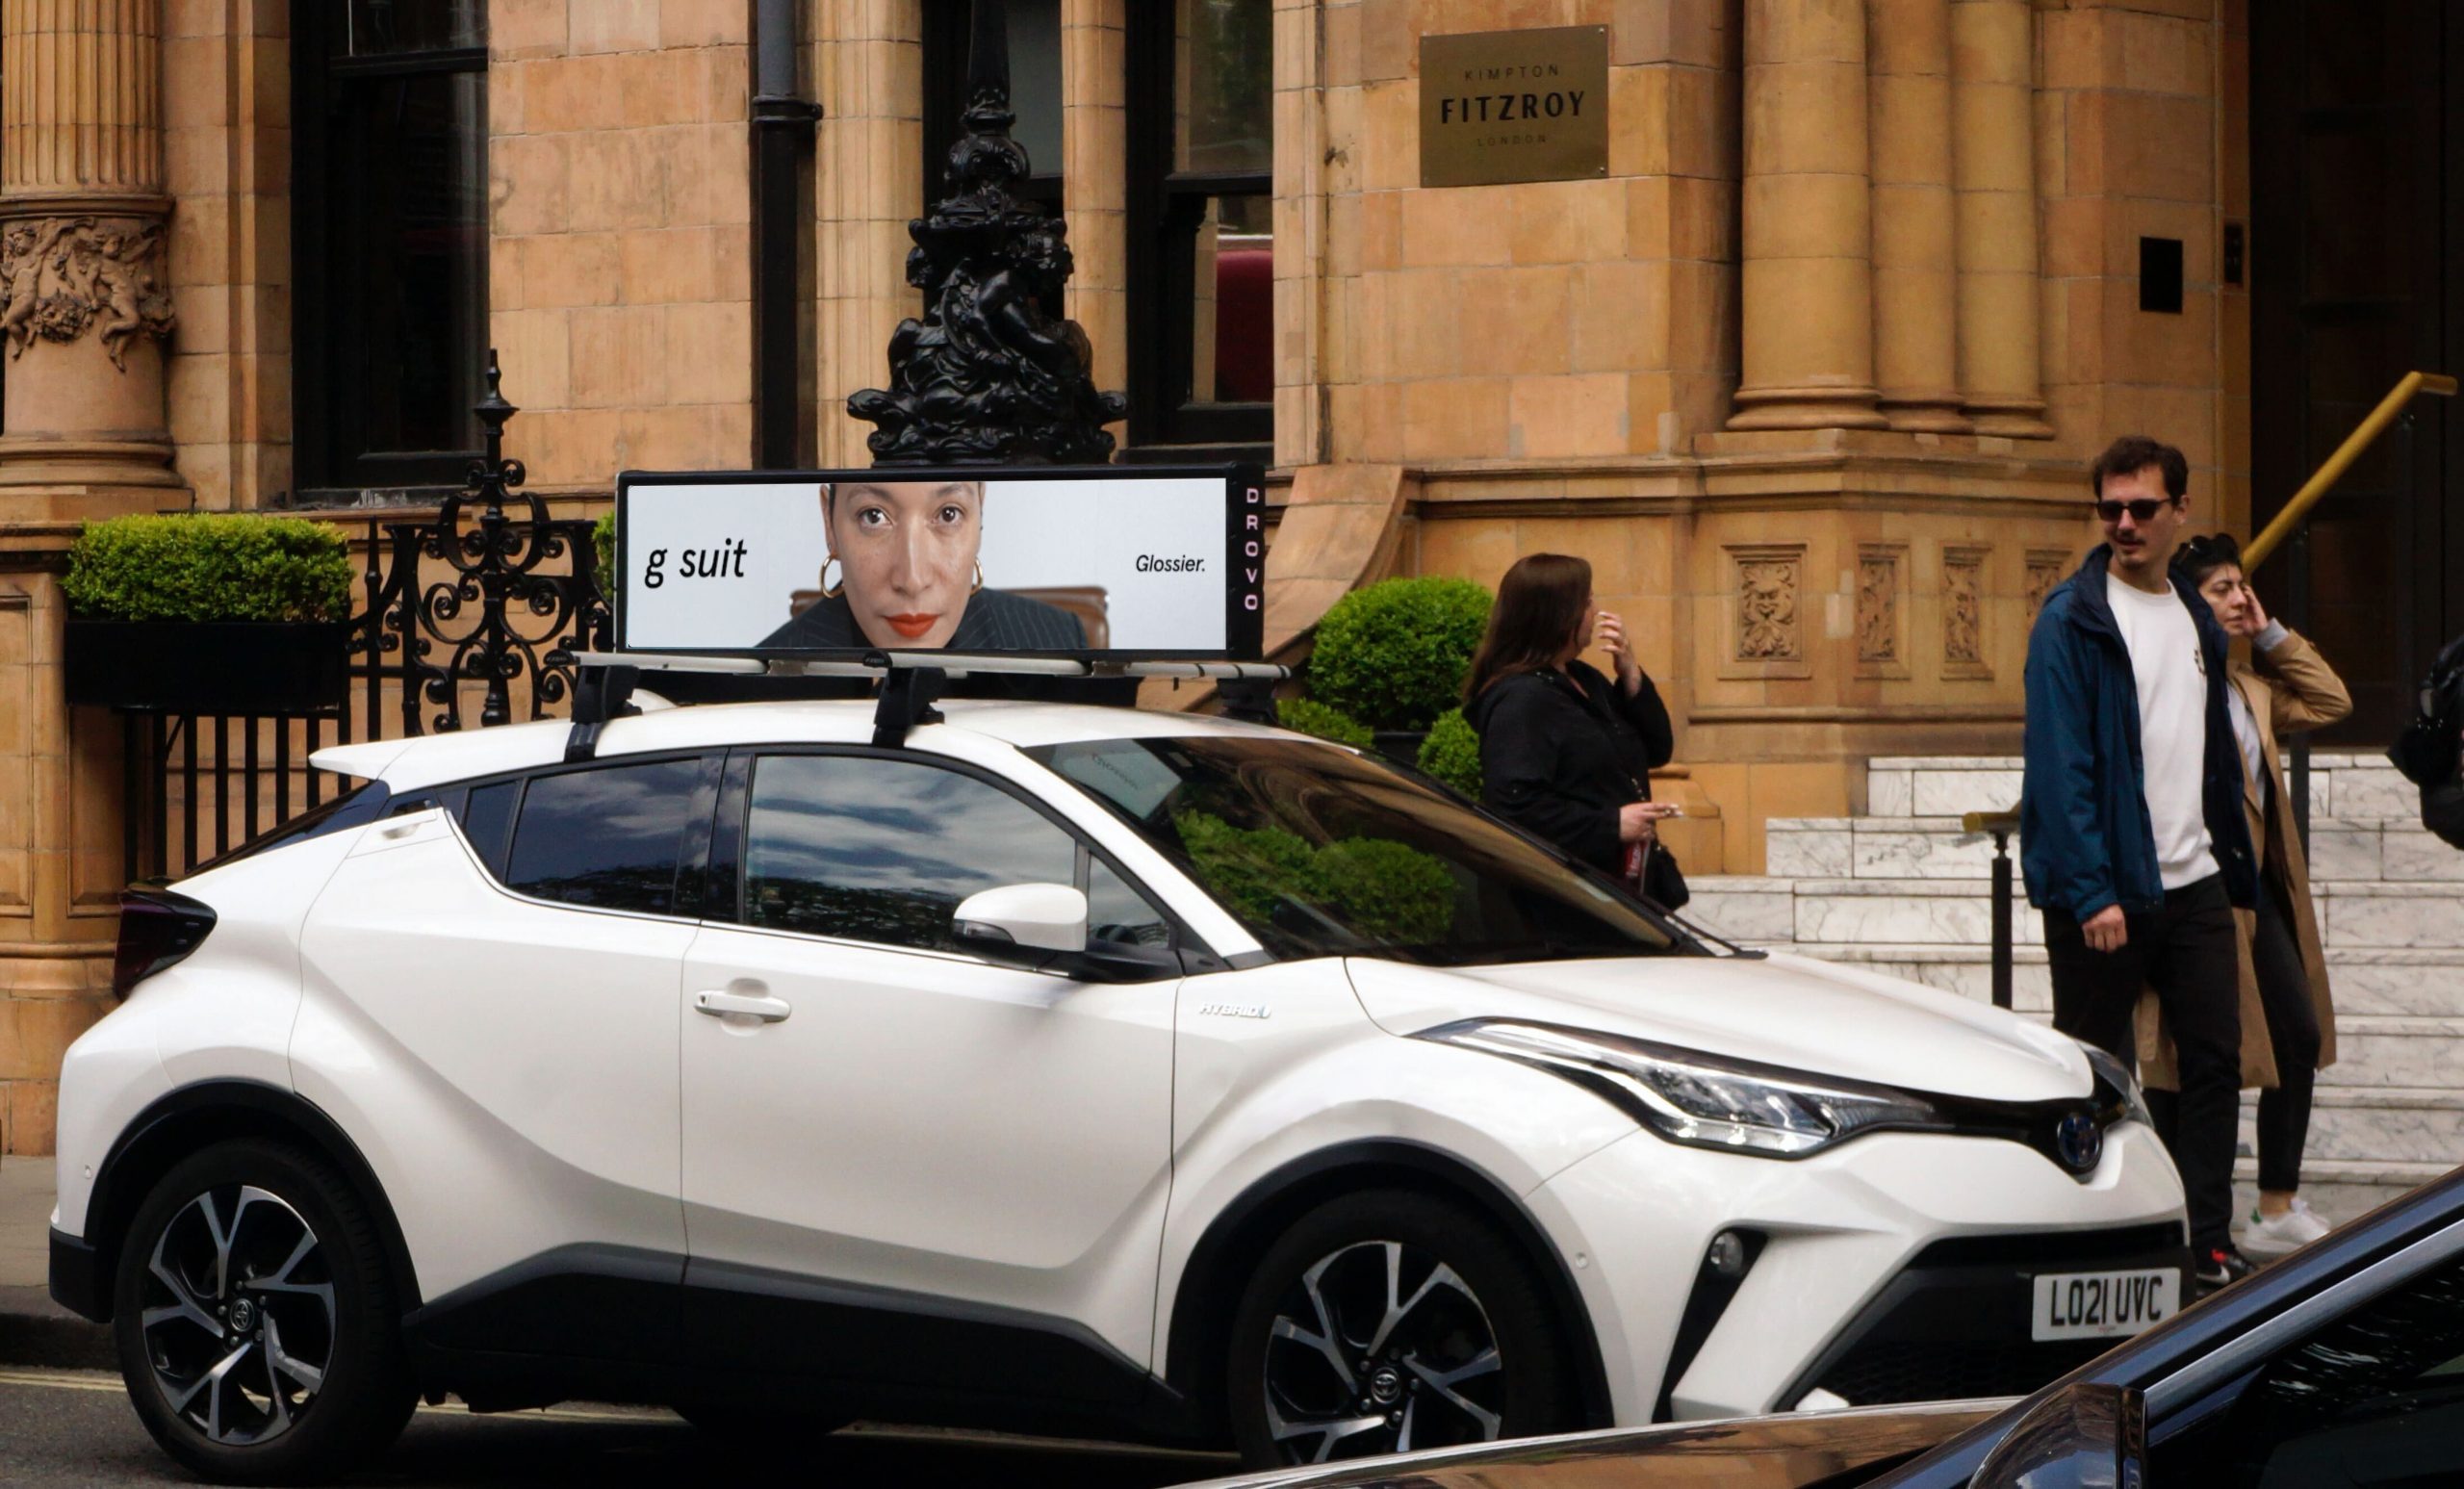 Drovo on-vehicle digital screen in London for Glossier